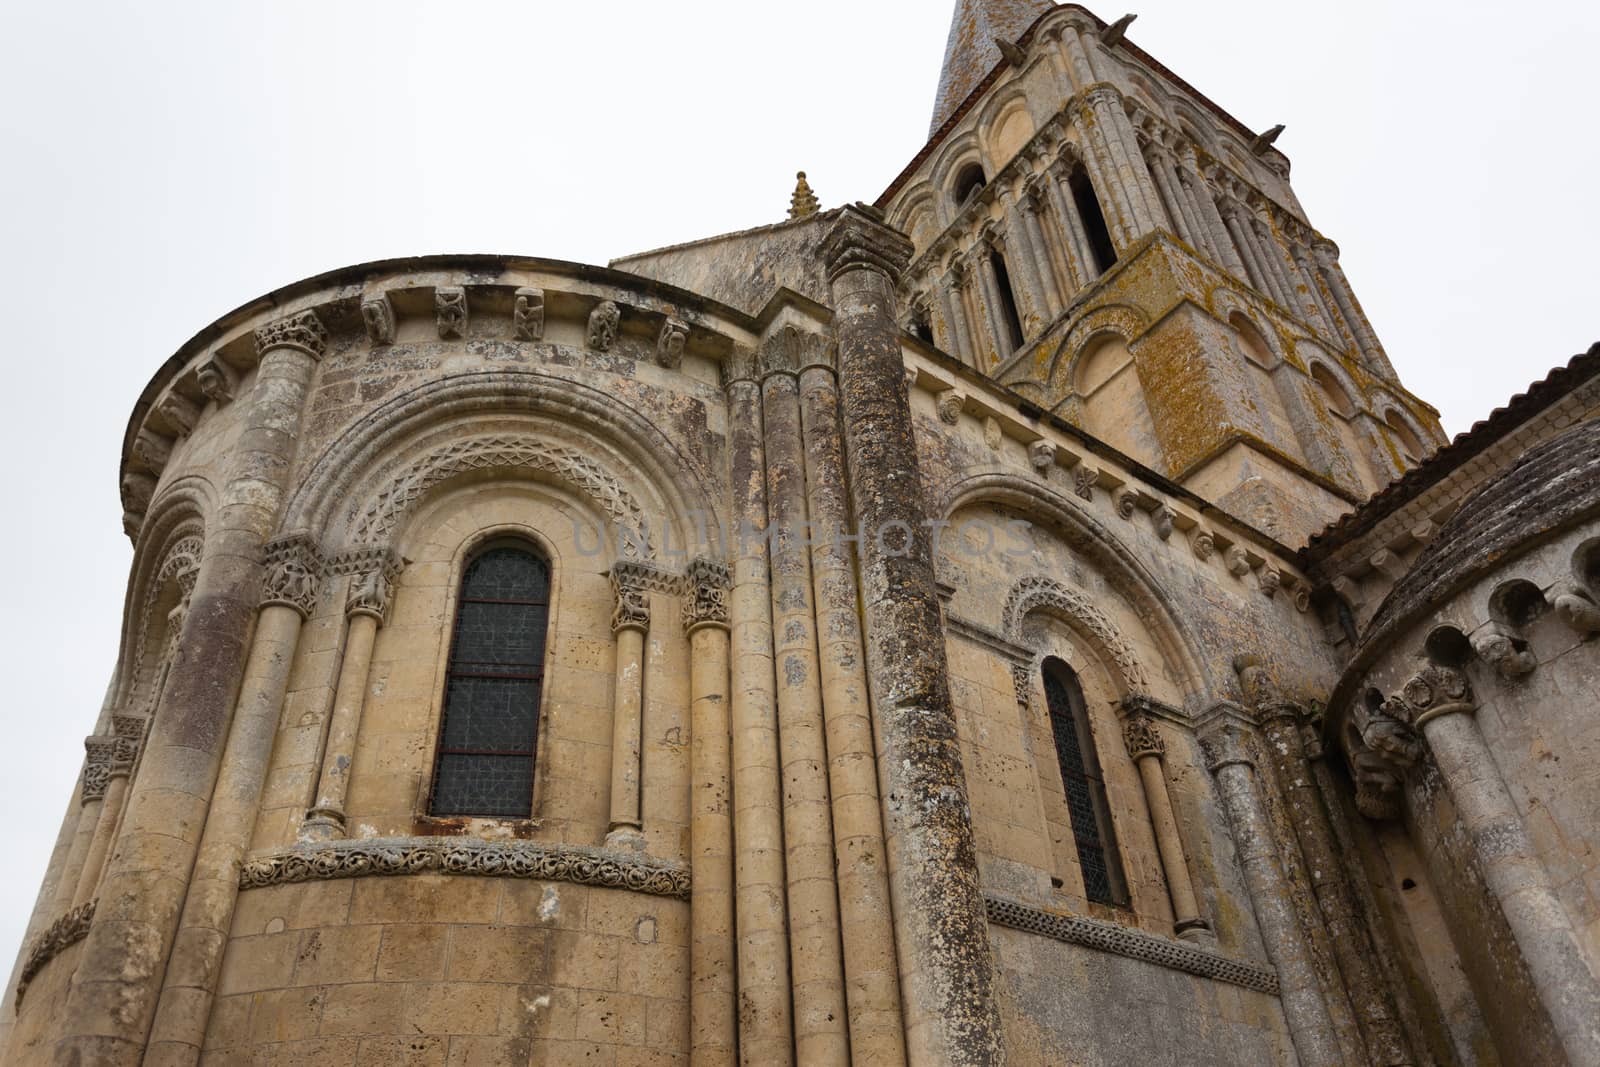 Close-up abse and tower view of Aulnay de Saintonge church in Charente Maritime region of France